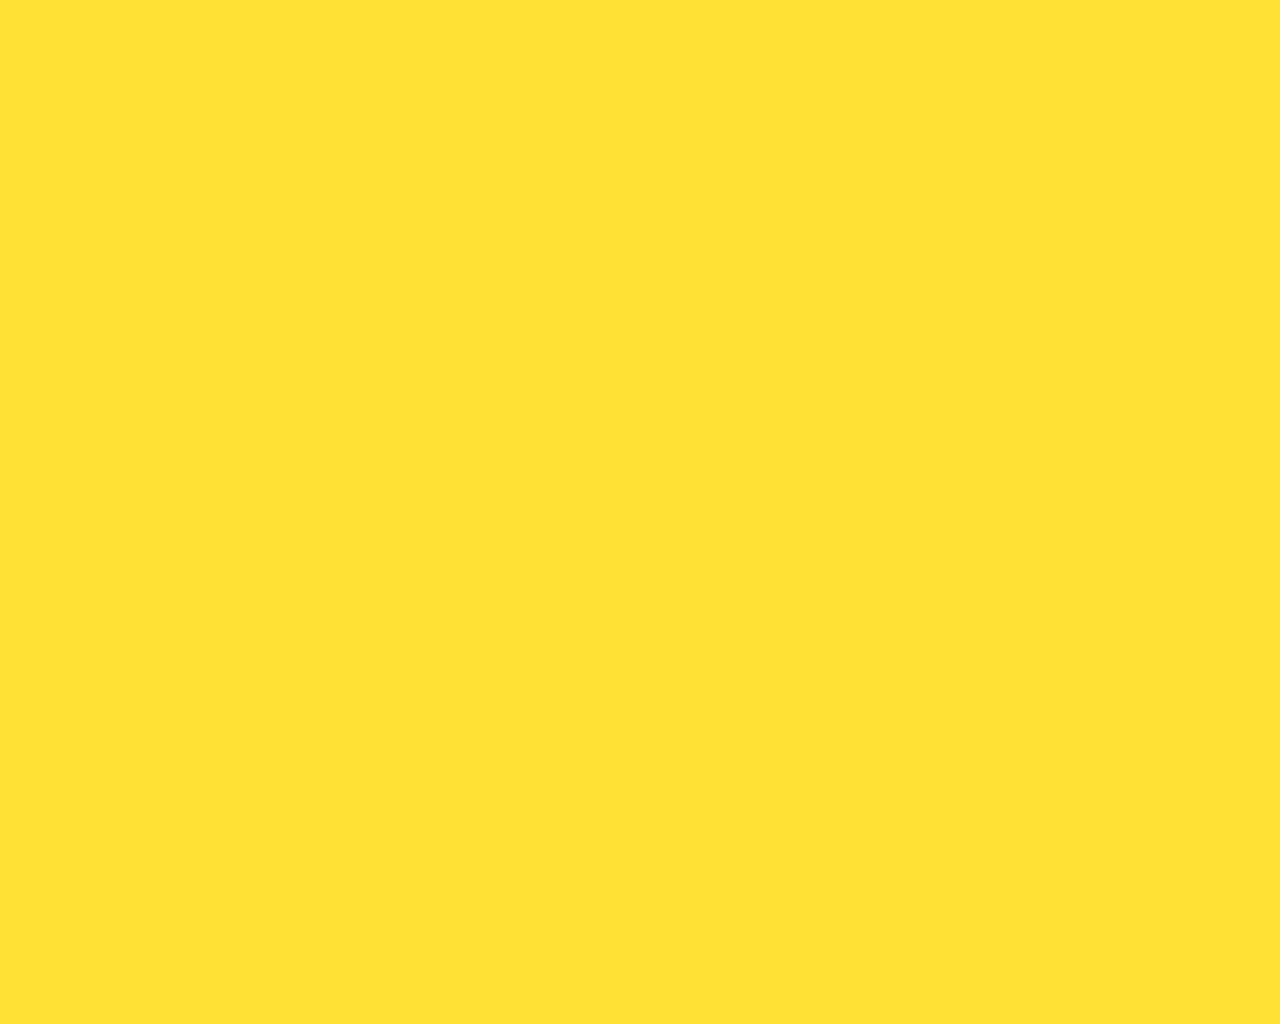 1280x1024 banana yellow solid color background